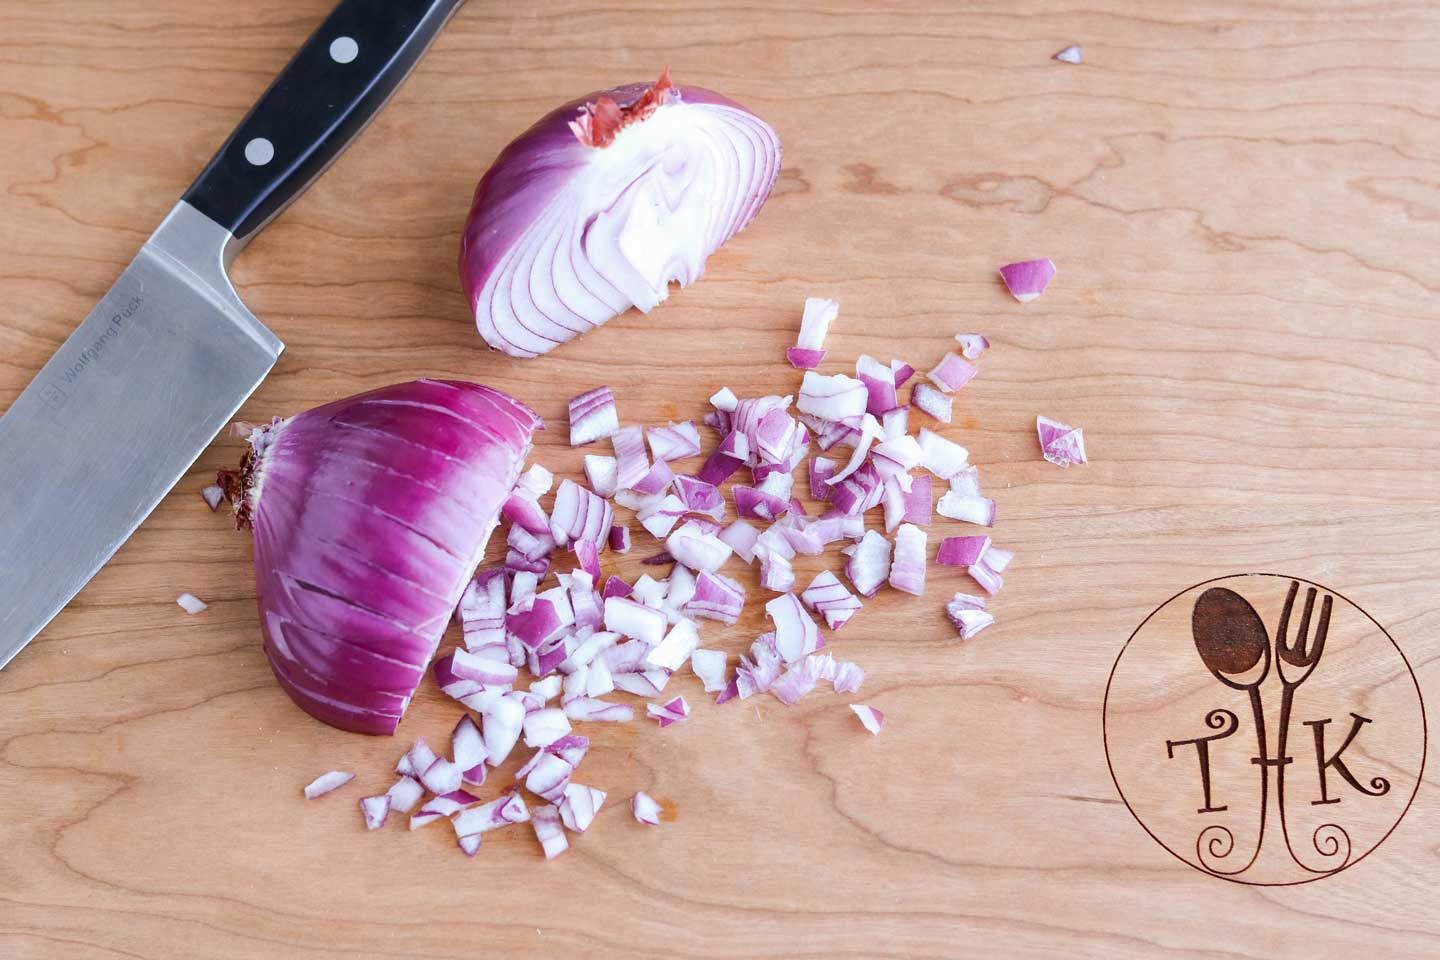 Chopping an onion takes a different amount of time for different people. When you’re trying to create a meal plan based on how long each recipe will take, be honest with yourself about things like your chopping skills and how long it will actually take you to complete the prep needed.